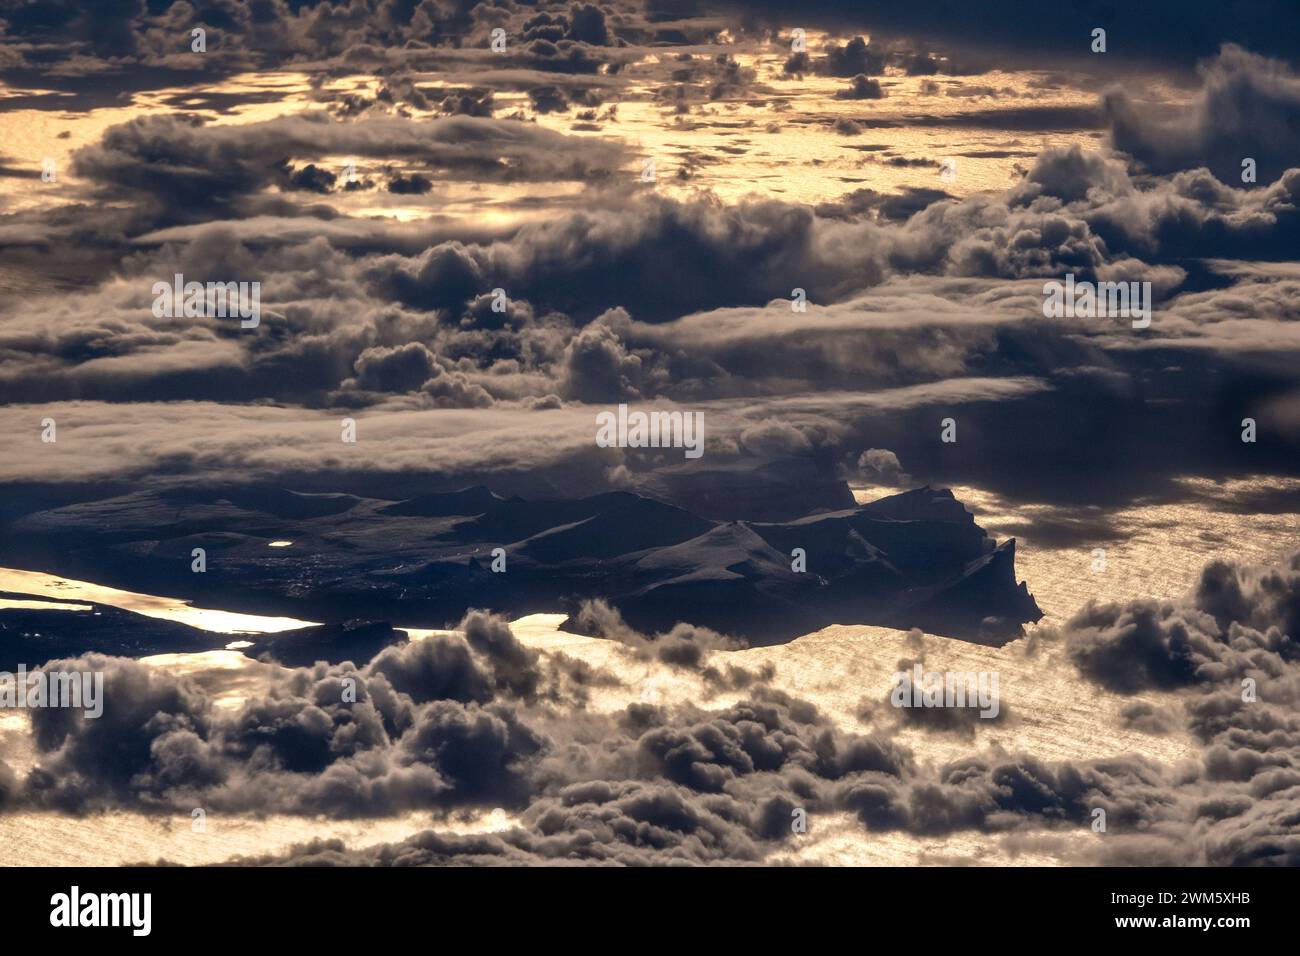 Faroe Islands, aerial view, islands peeking out from clouds Stock Photo